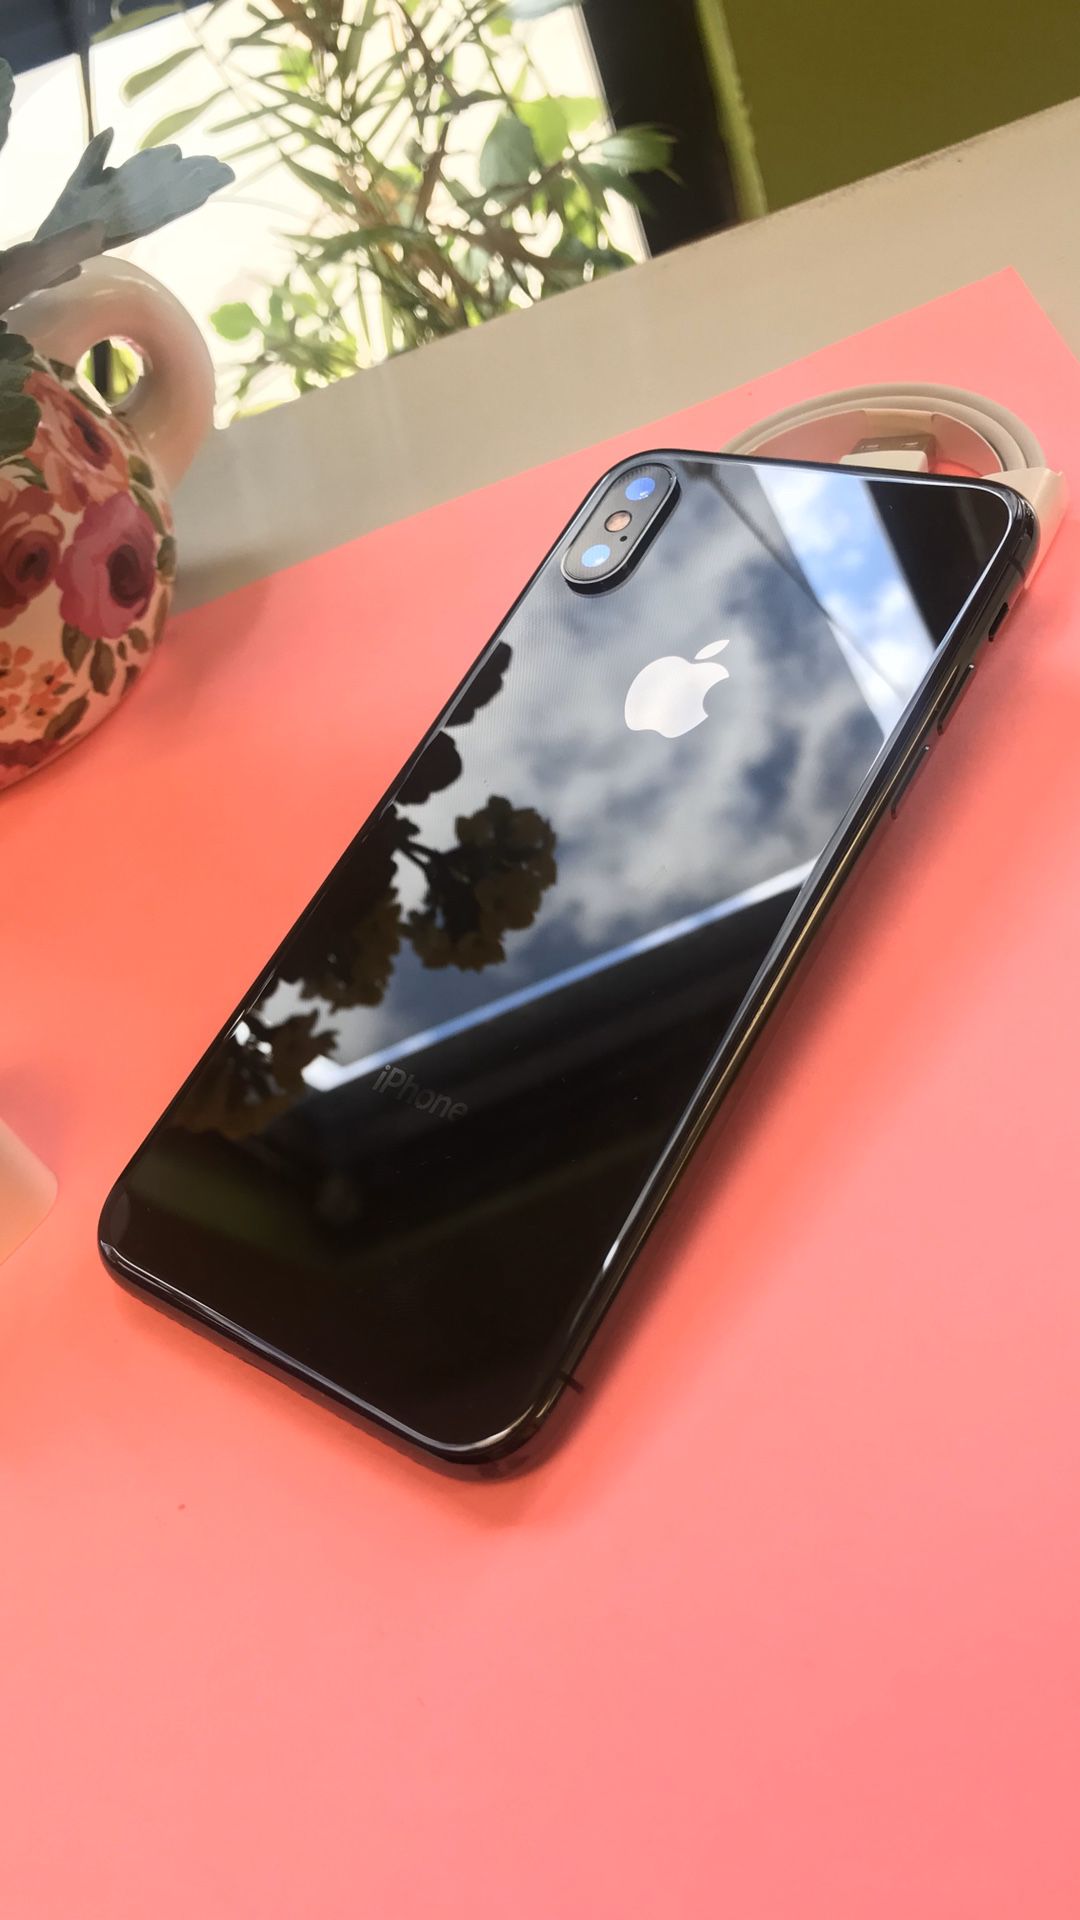 Factory unlocked iPhone X 64gb excellent condition